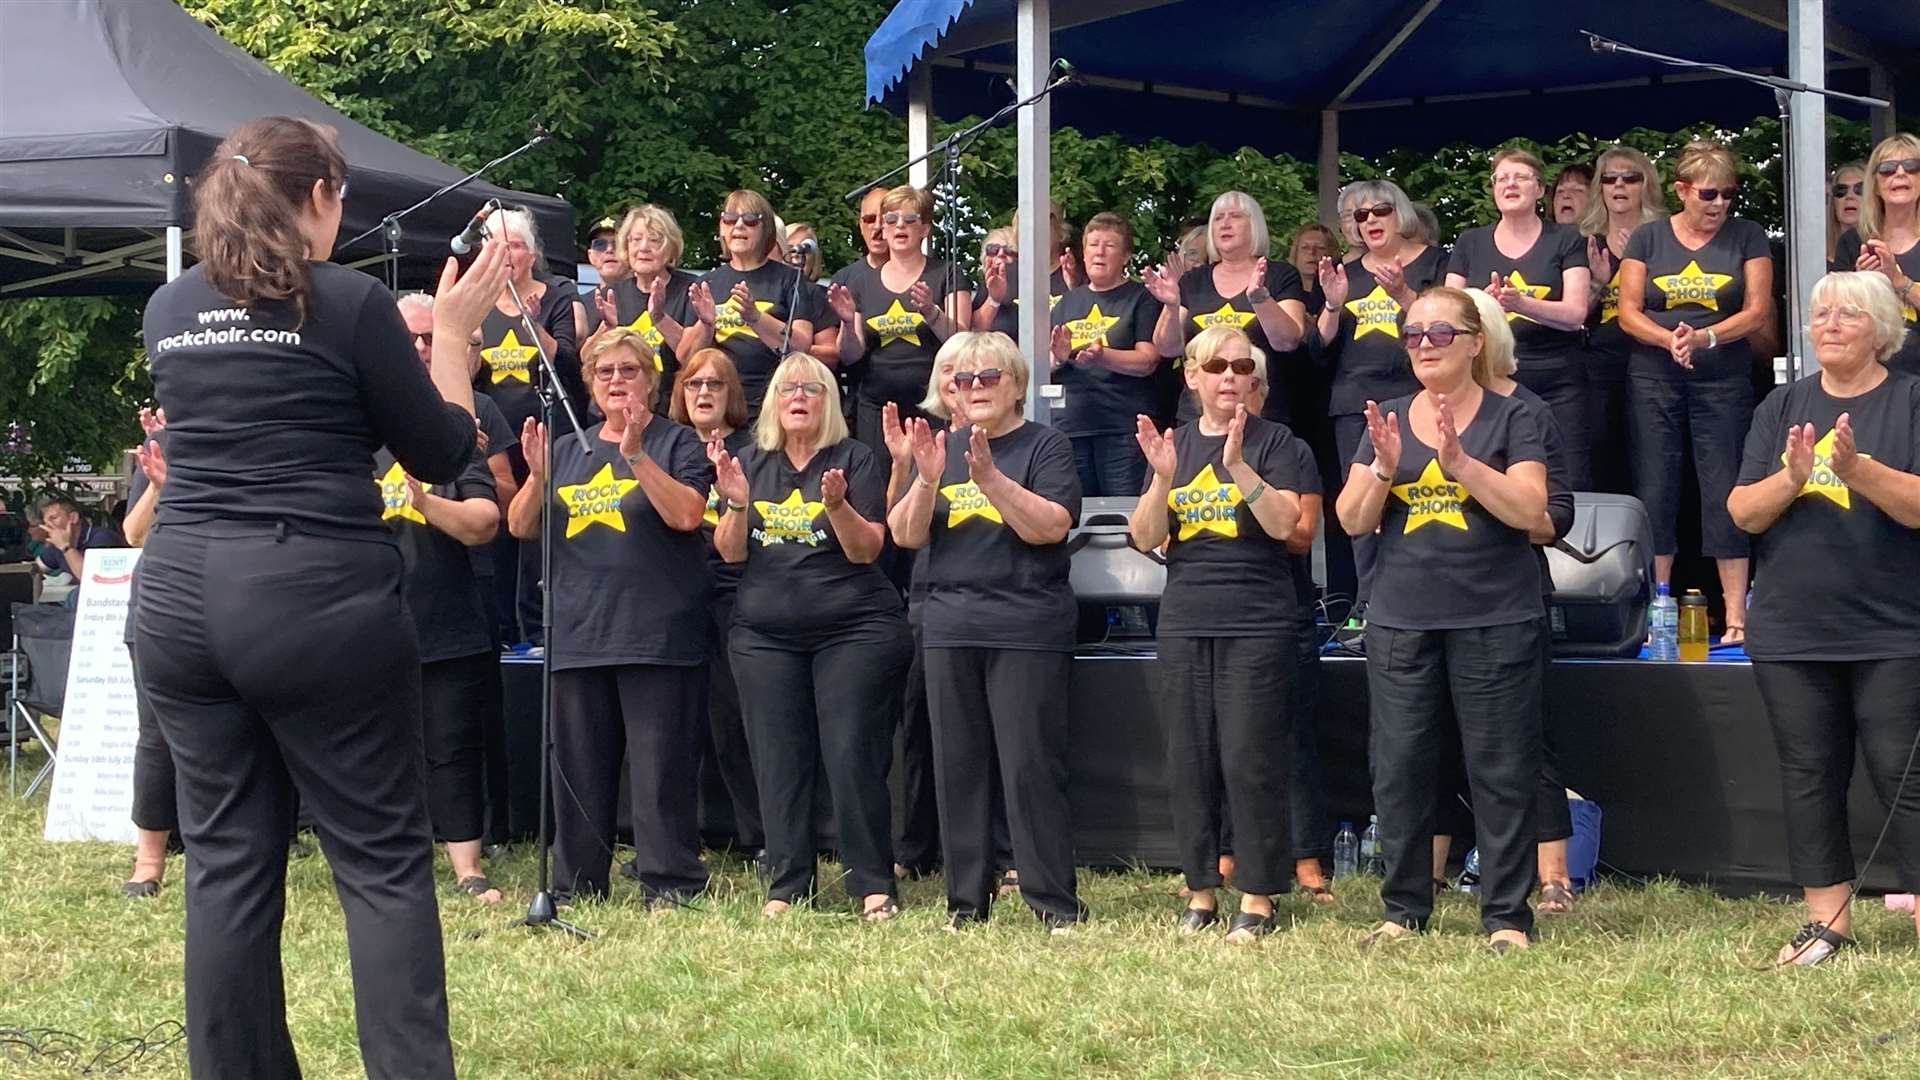 The Rock Choir with music and entertainment at the Kent County Show